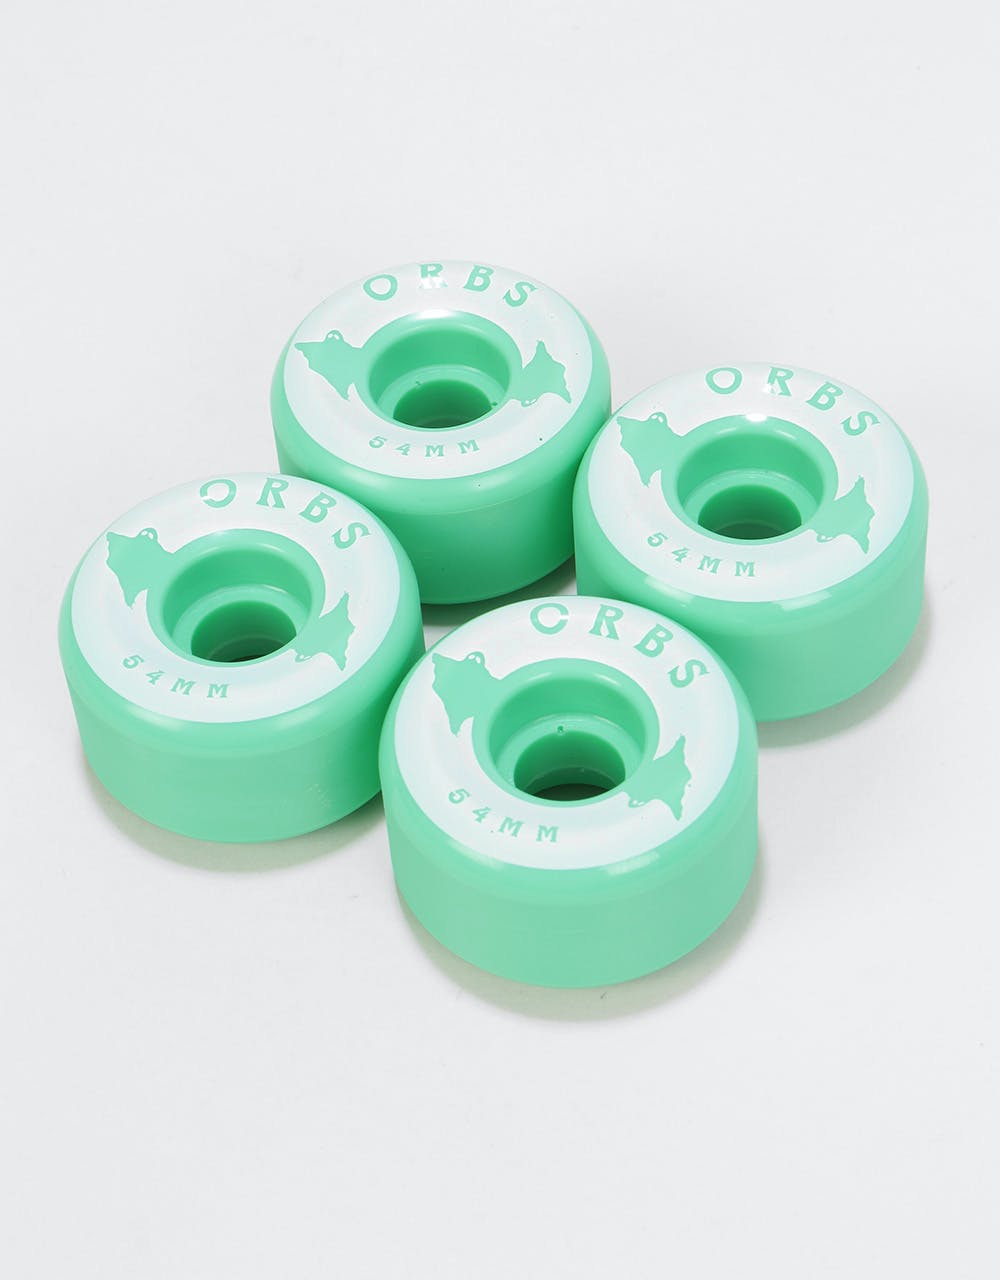 Orbs Specters Solids Conical 99a Skateboard Wheel - 54mm